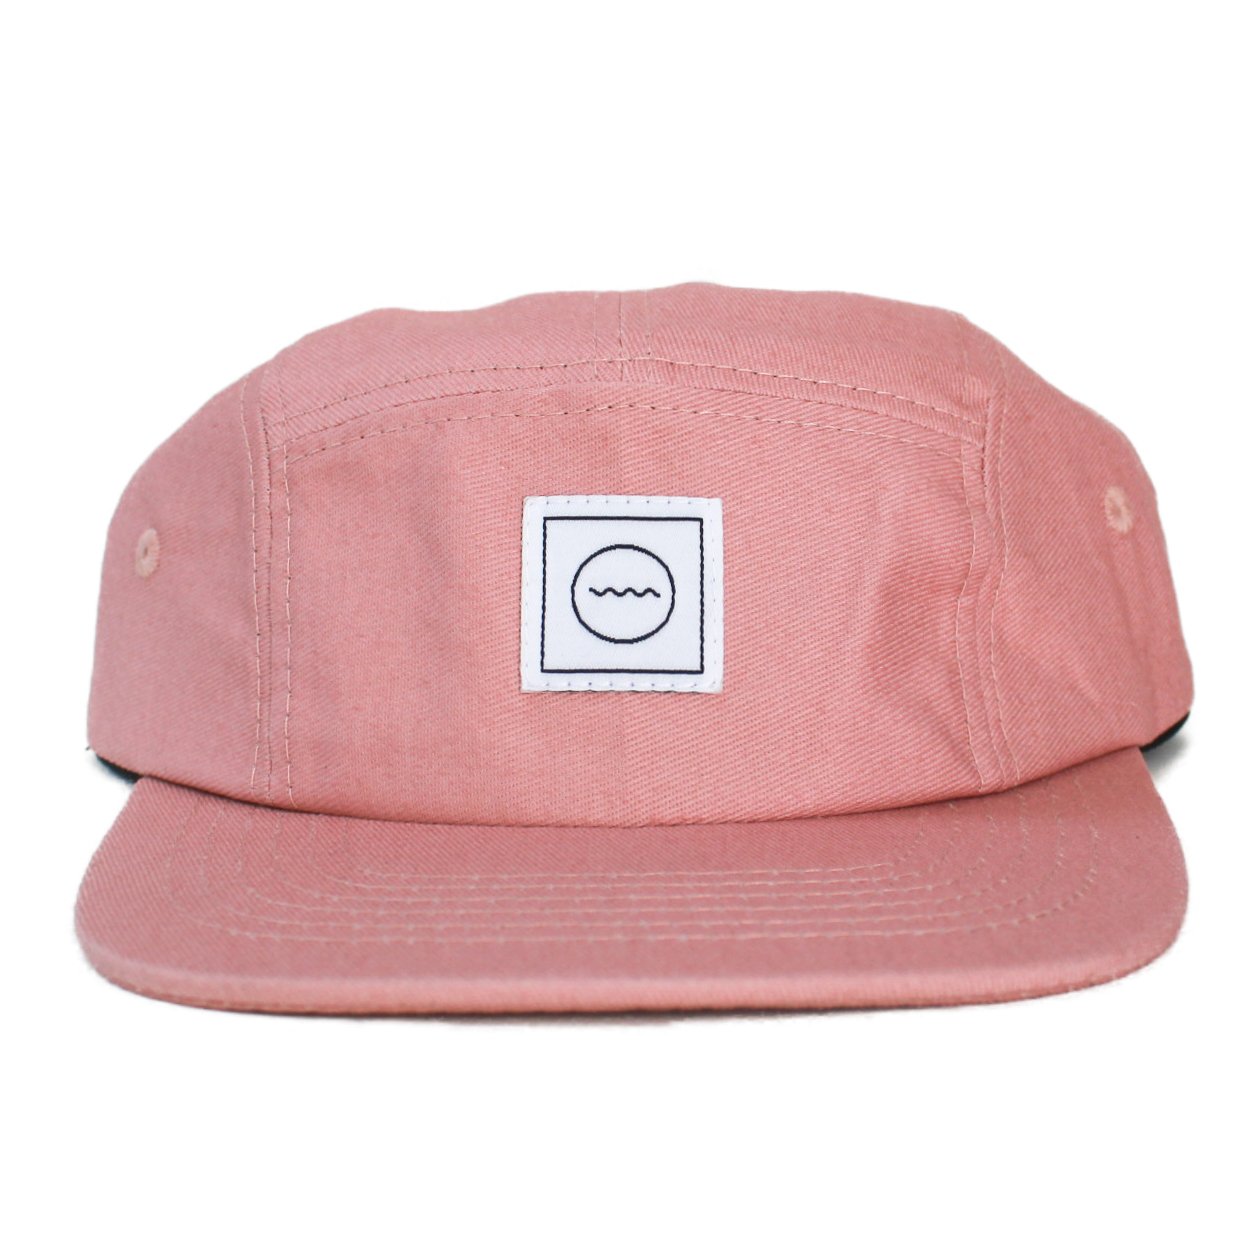 five-panel hat in blush